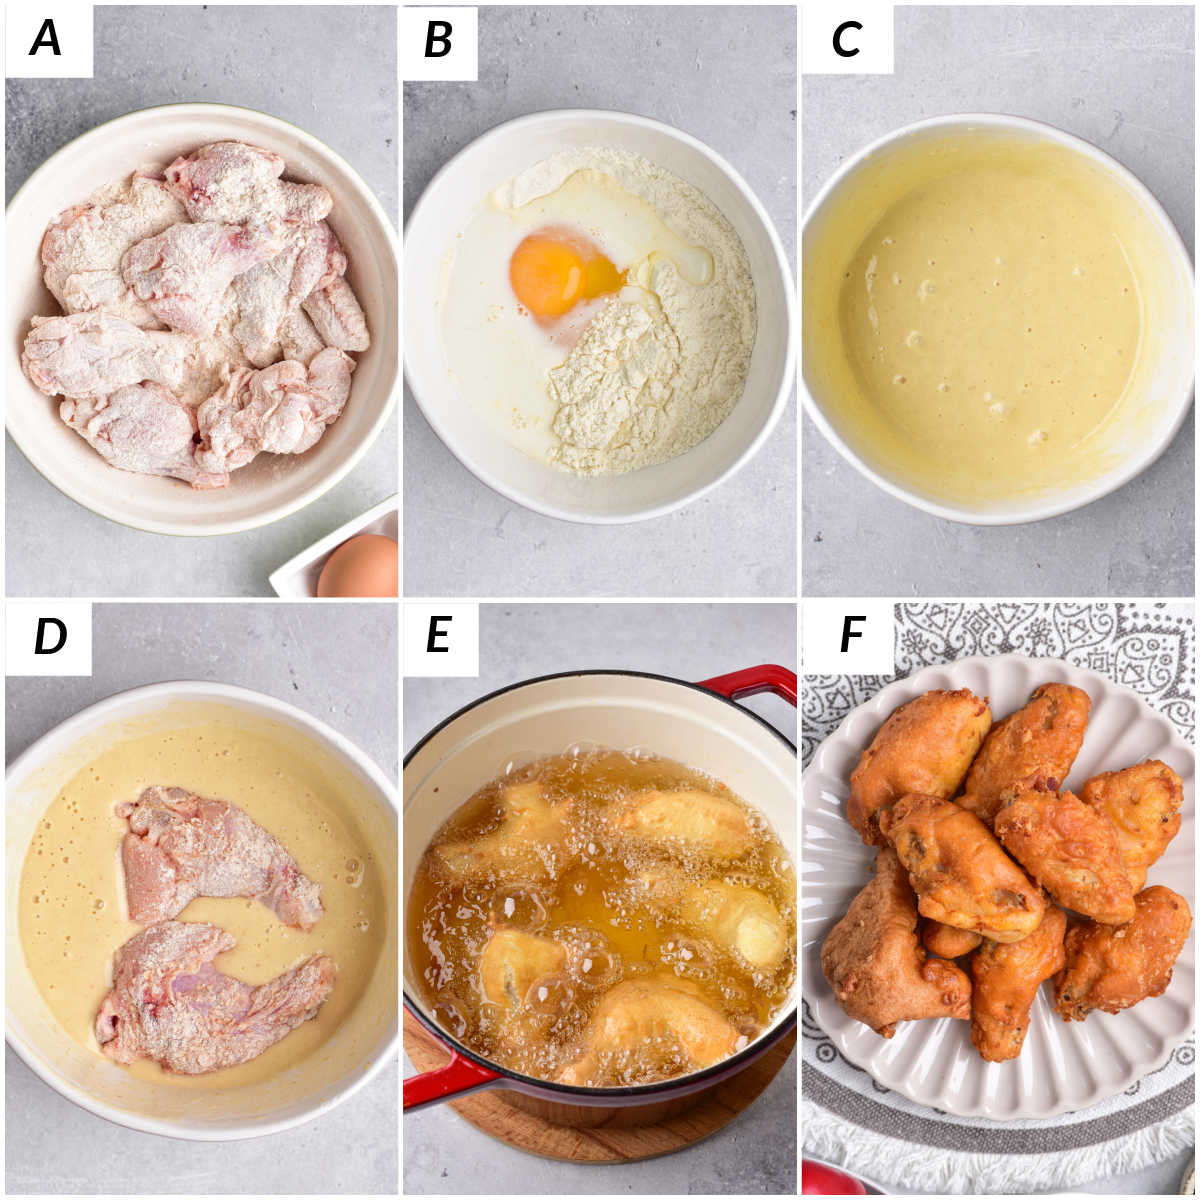 image collage showing the steps for making deep fried chicken wings